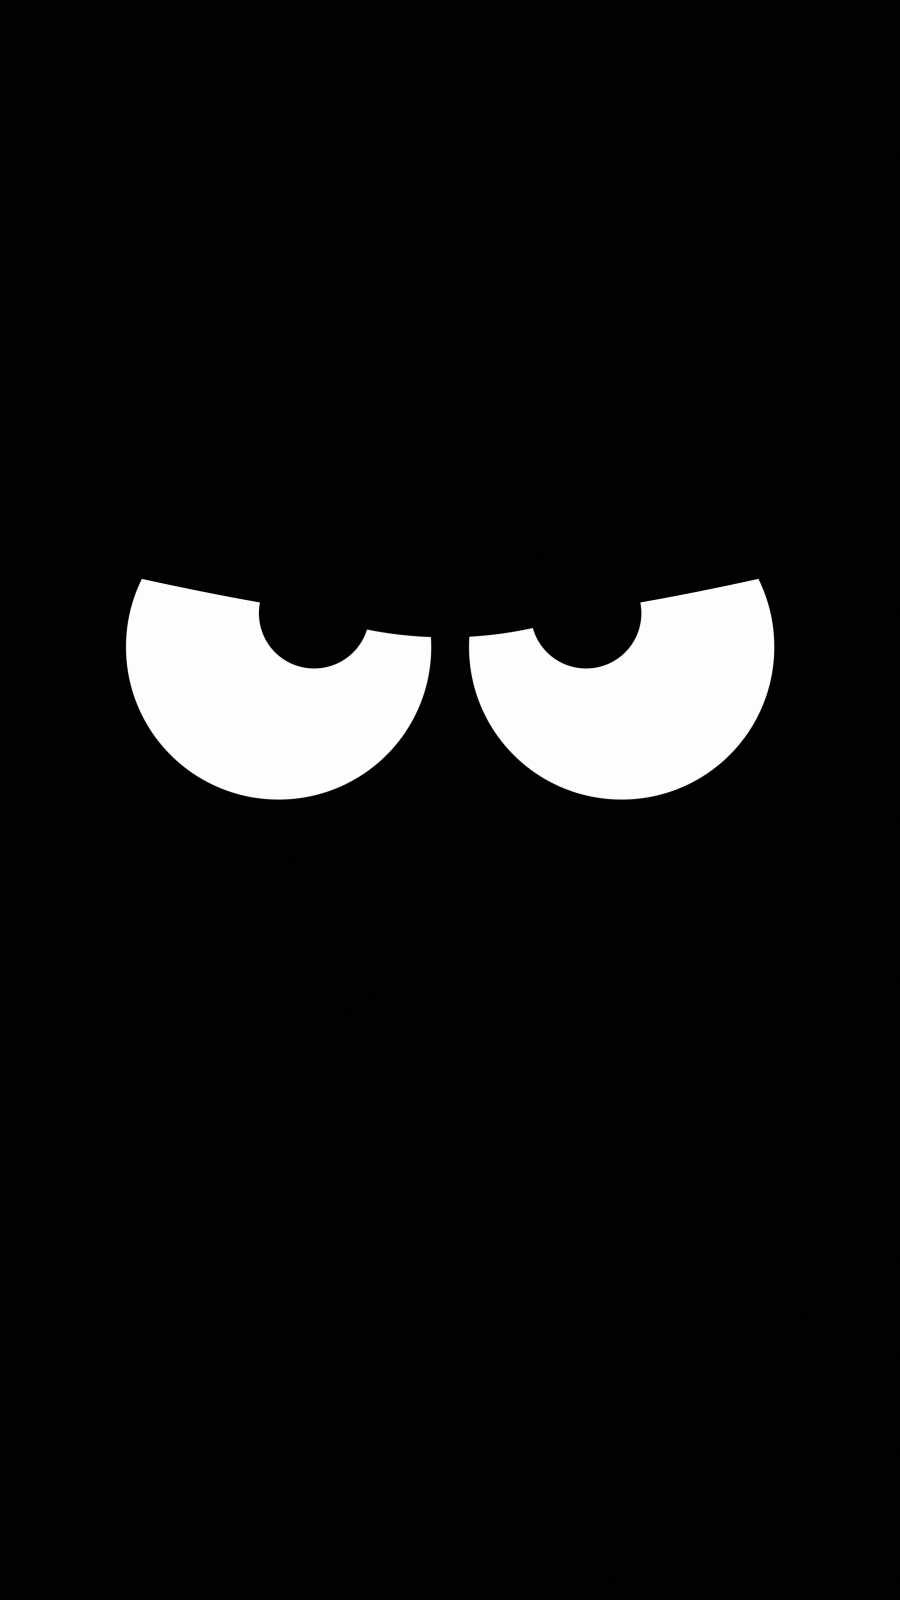 Angry Eyes iPhone Wallpaper